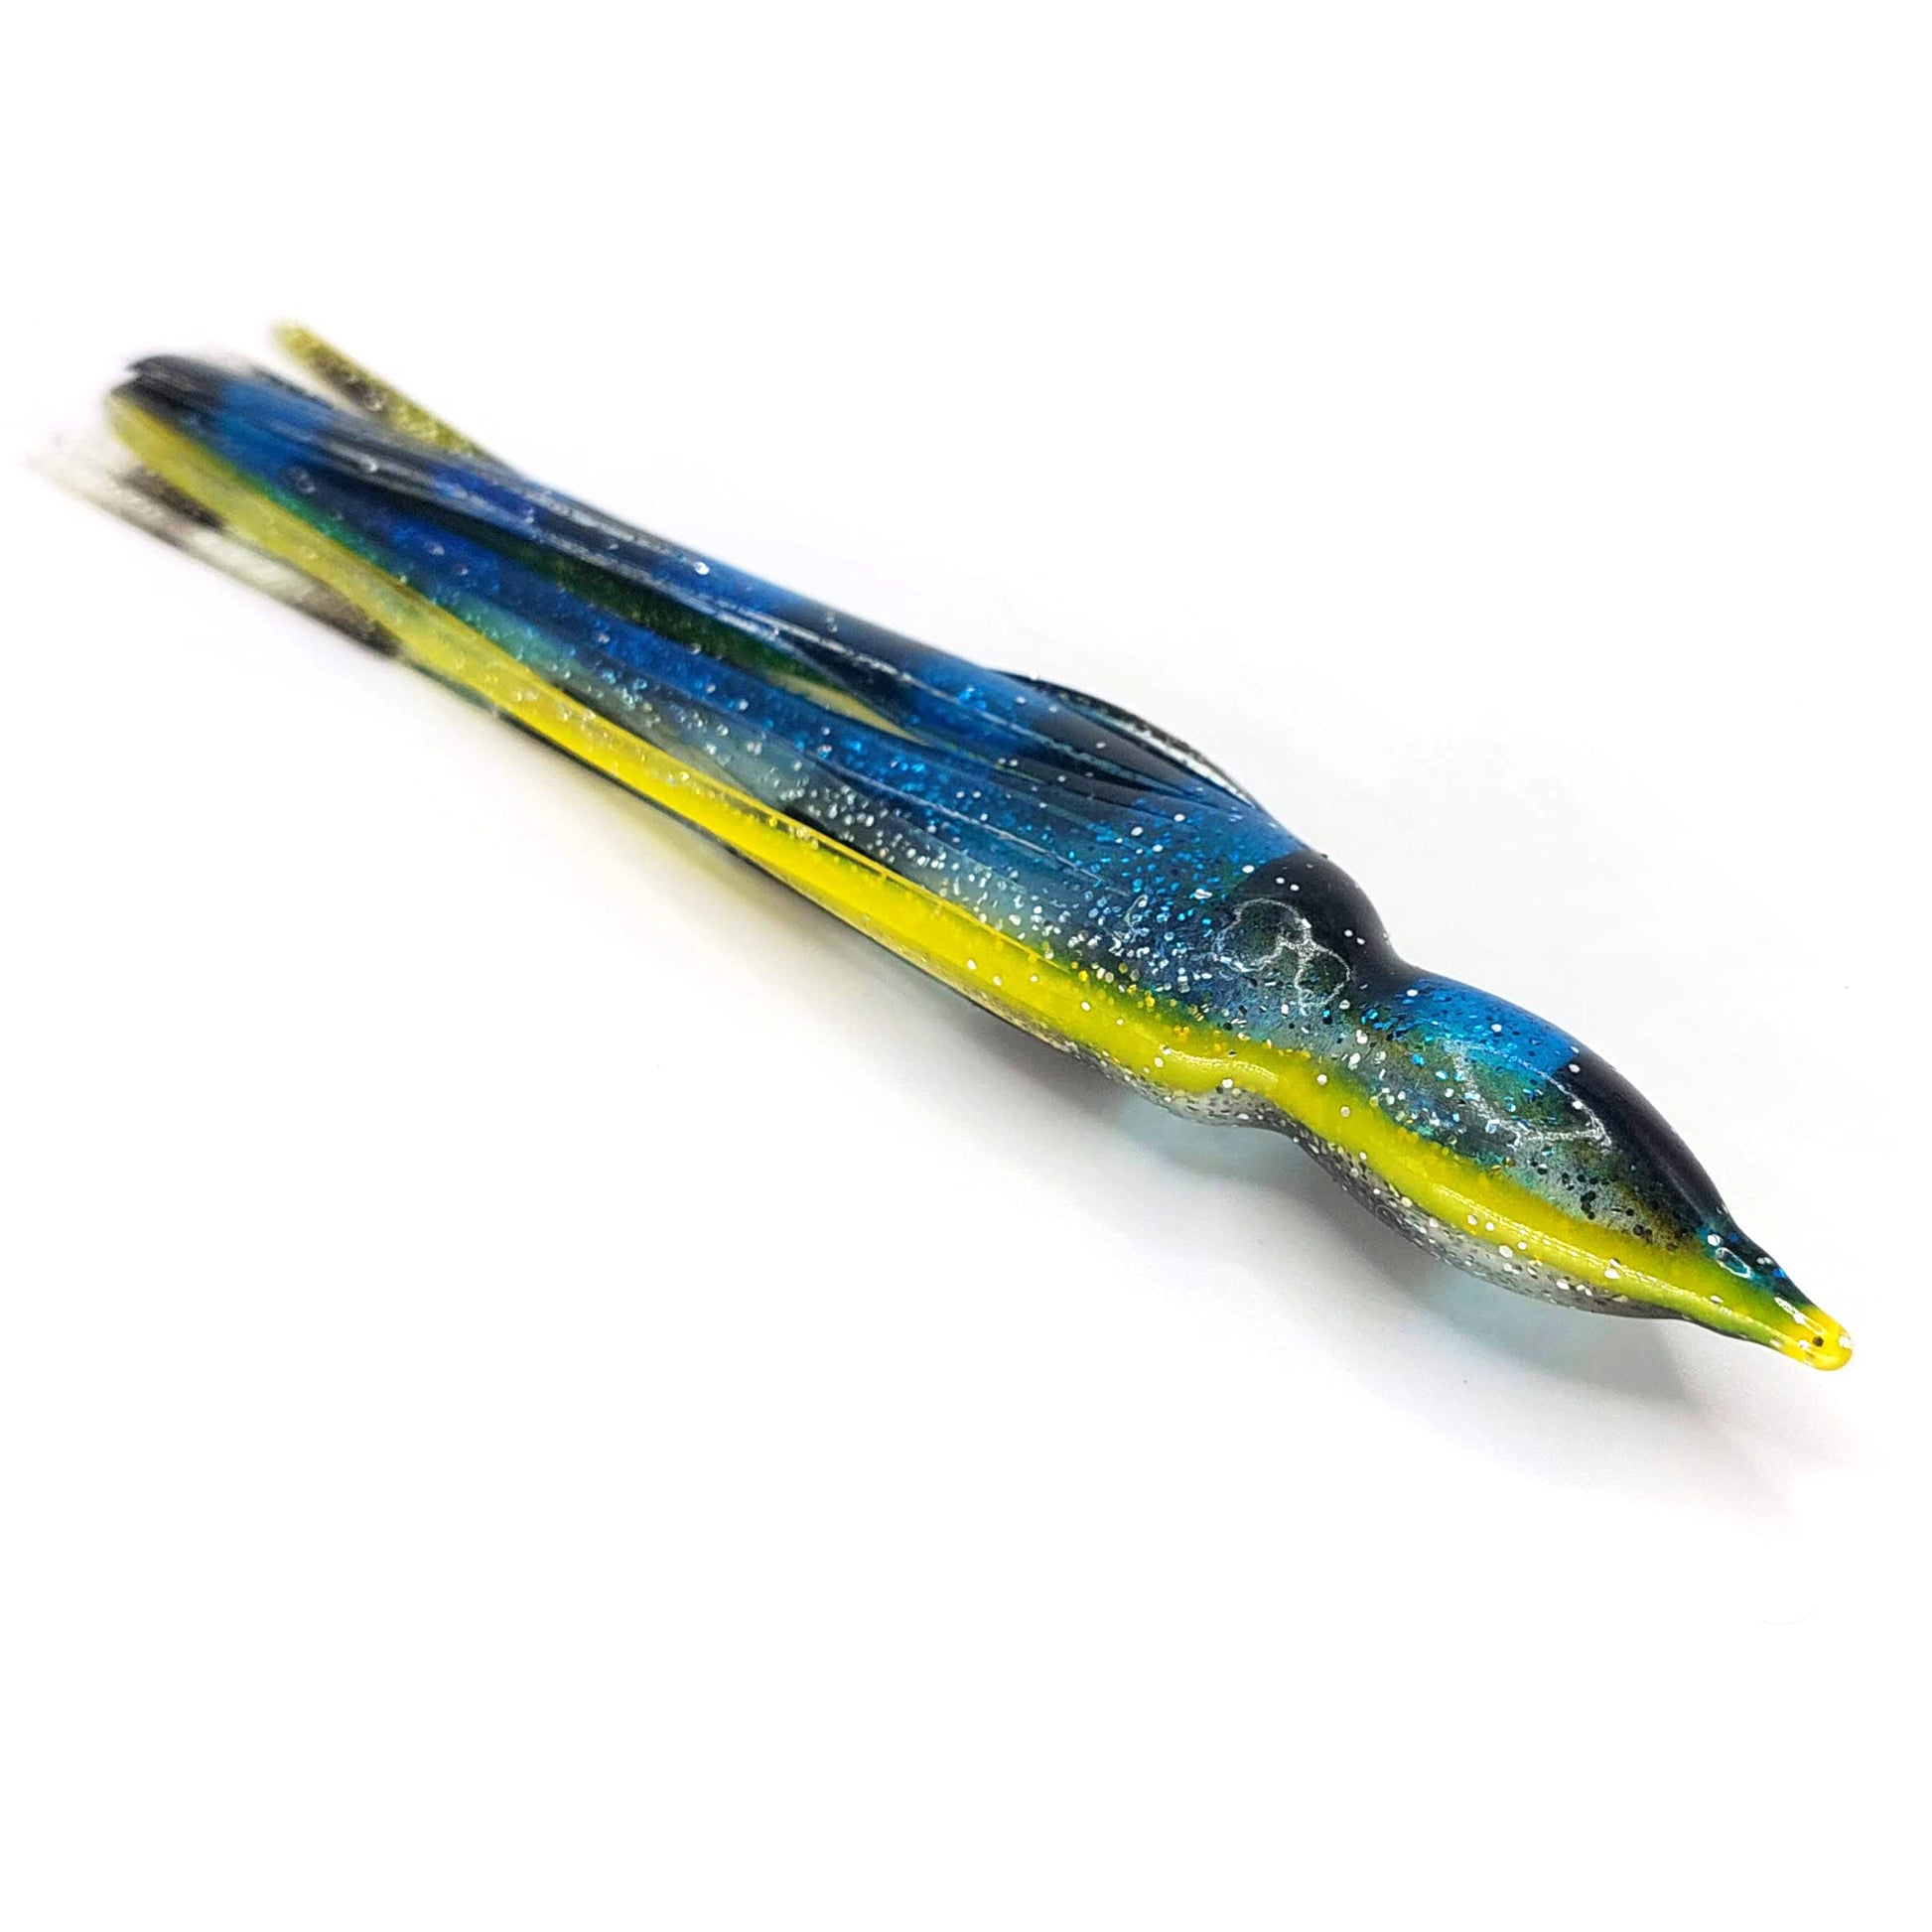 9.5" Squid Skirts 6 Pack - Evolution Lures